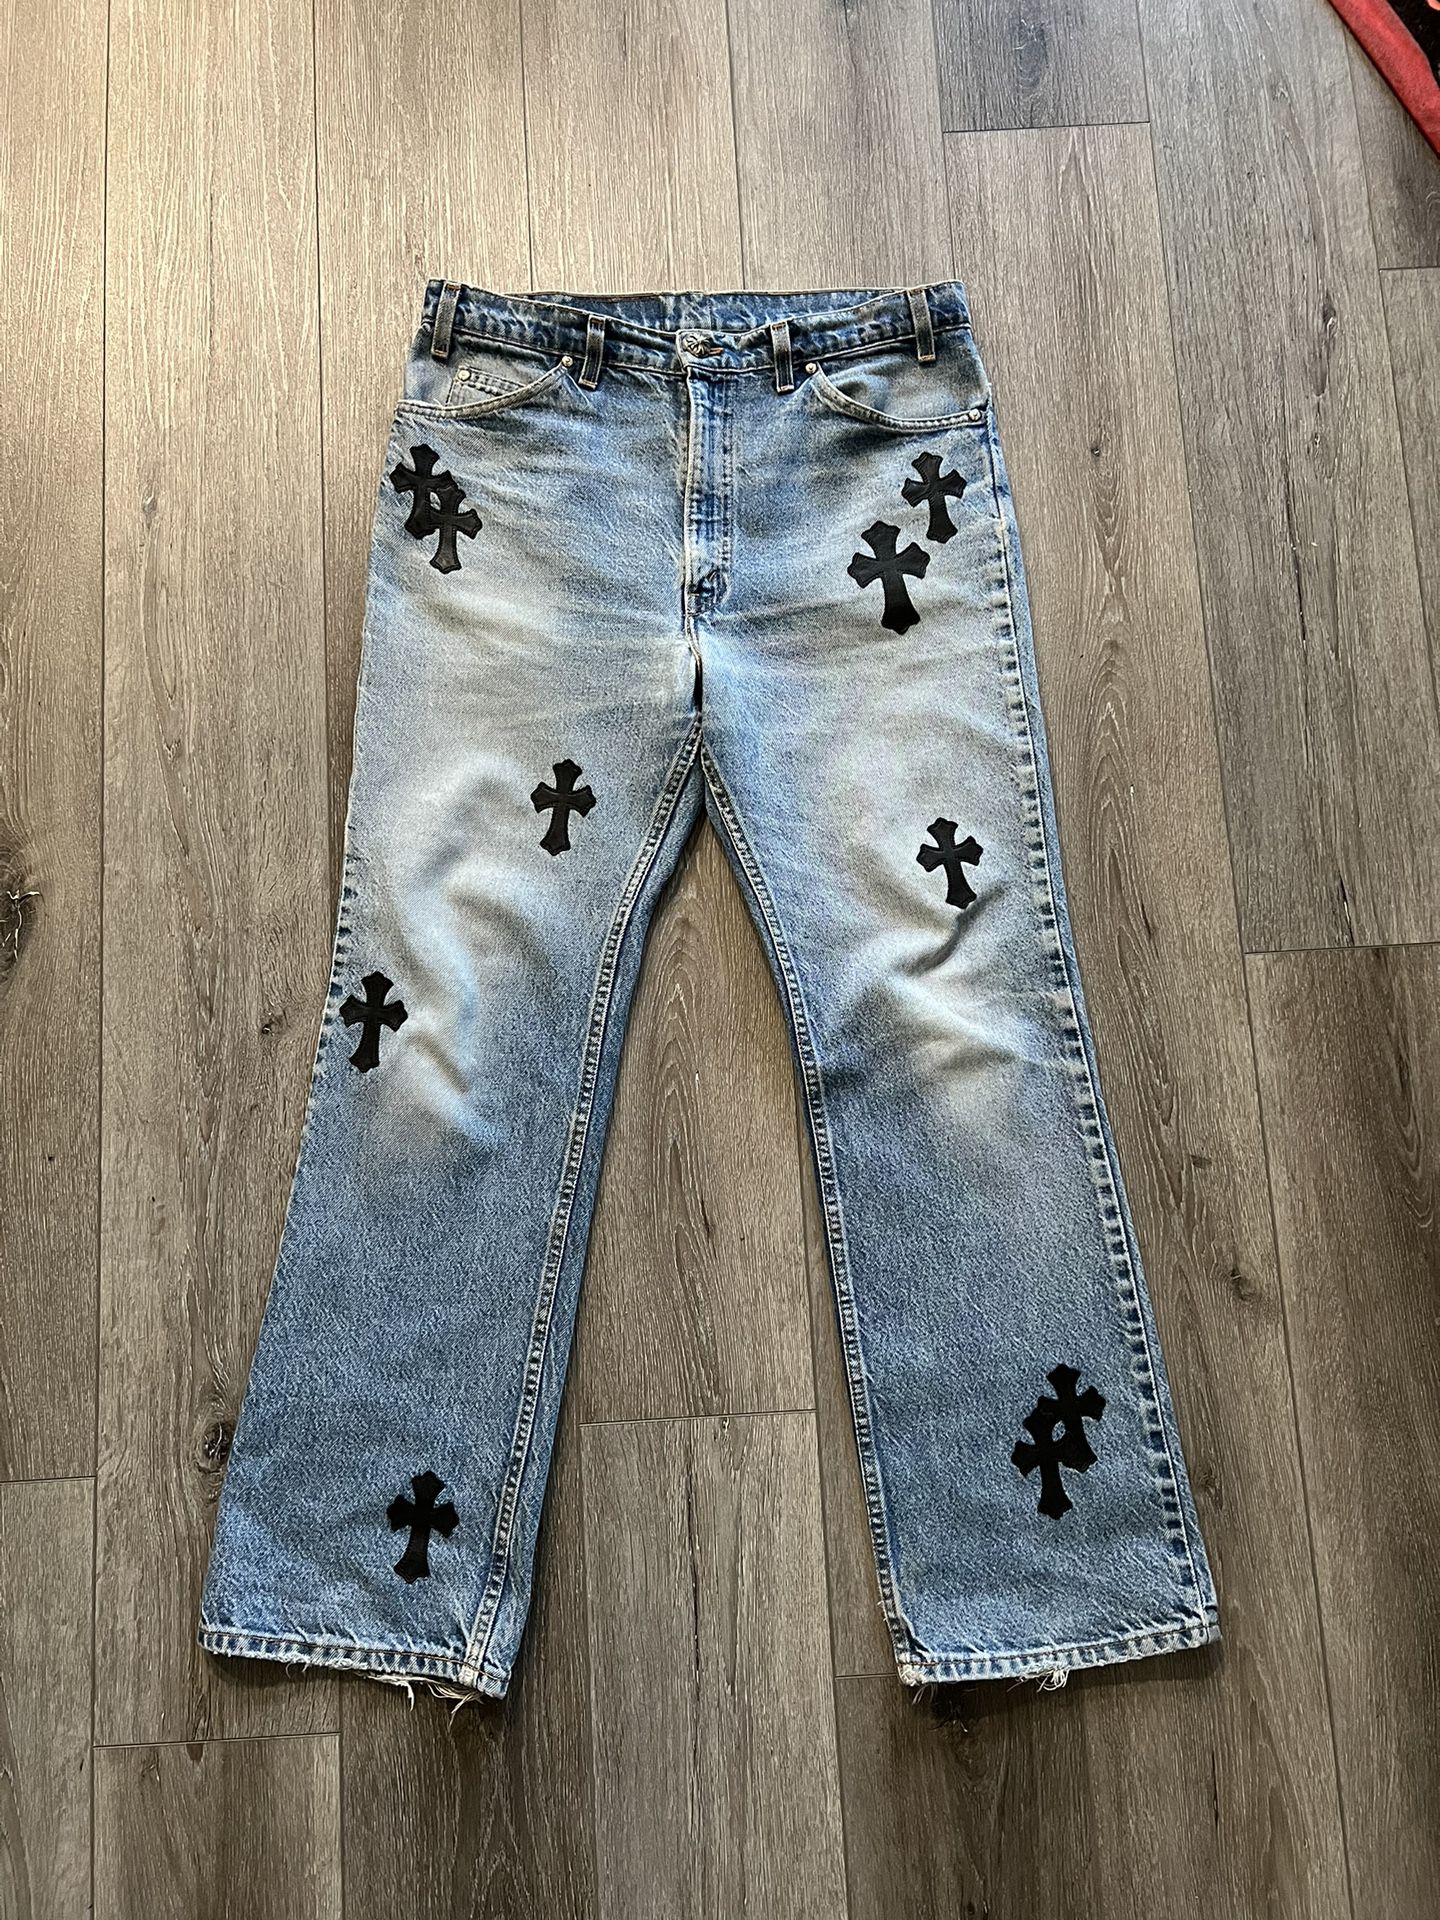 Chrome Hearts Clothing: Where to Buy & Resale Prices